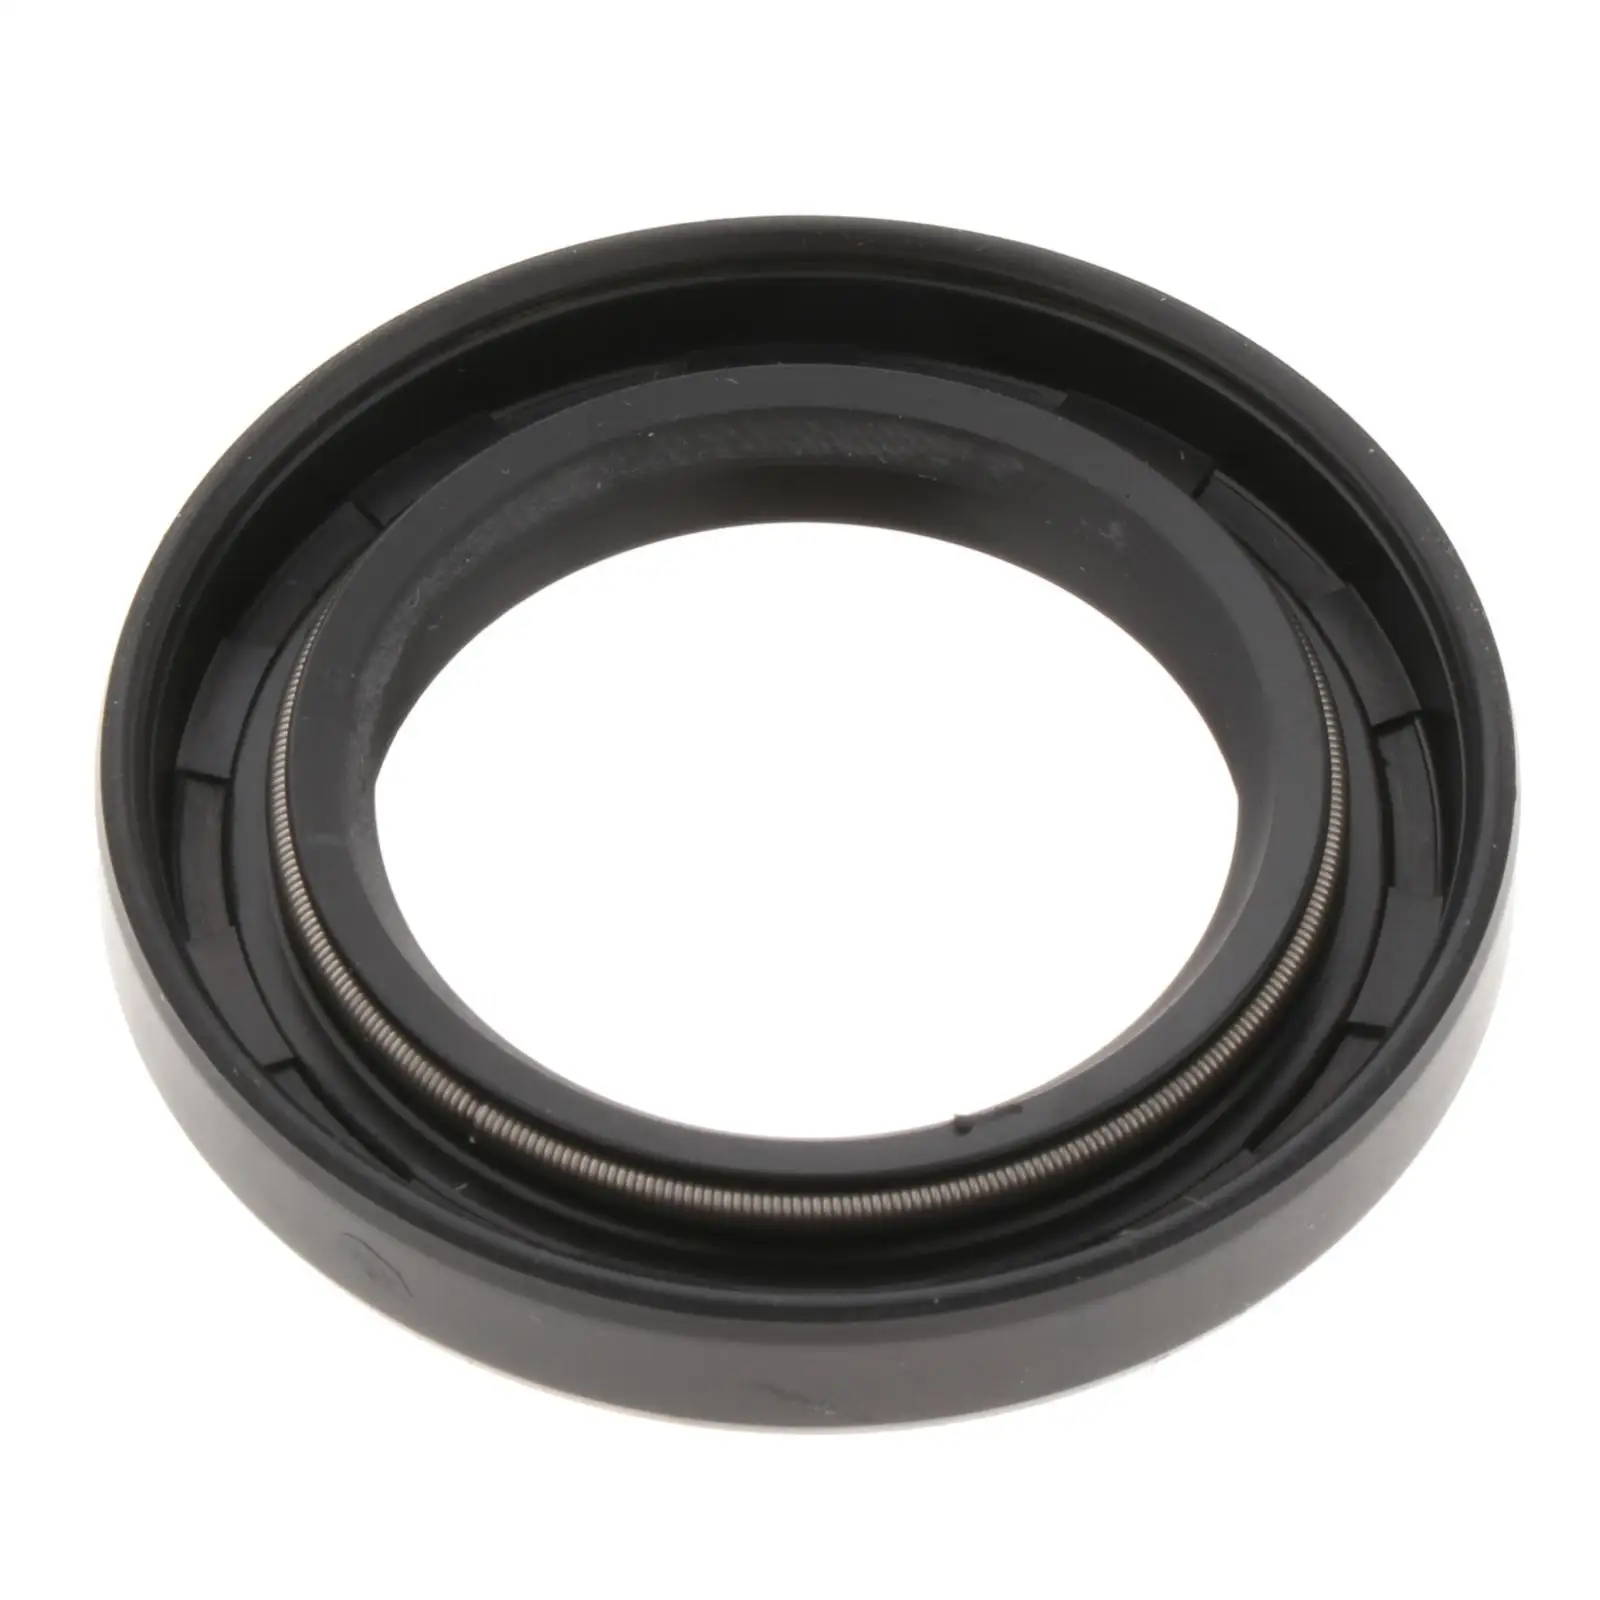 Oil Seal 93102-30M23 Fit for Yamaha Outboard Motor 2T 60HP-90HP Accessories